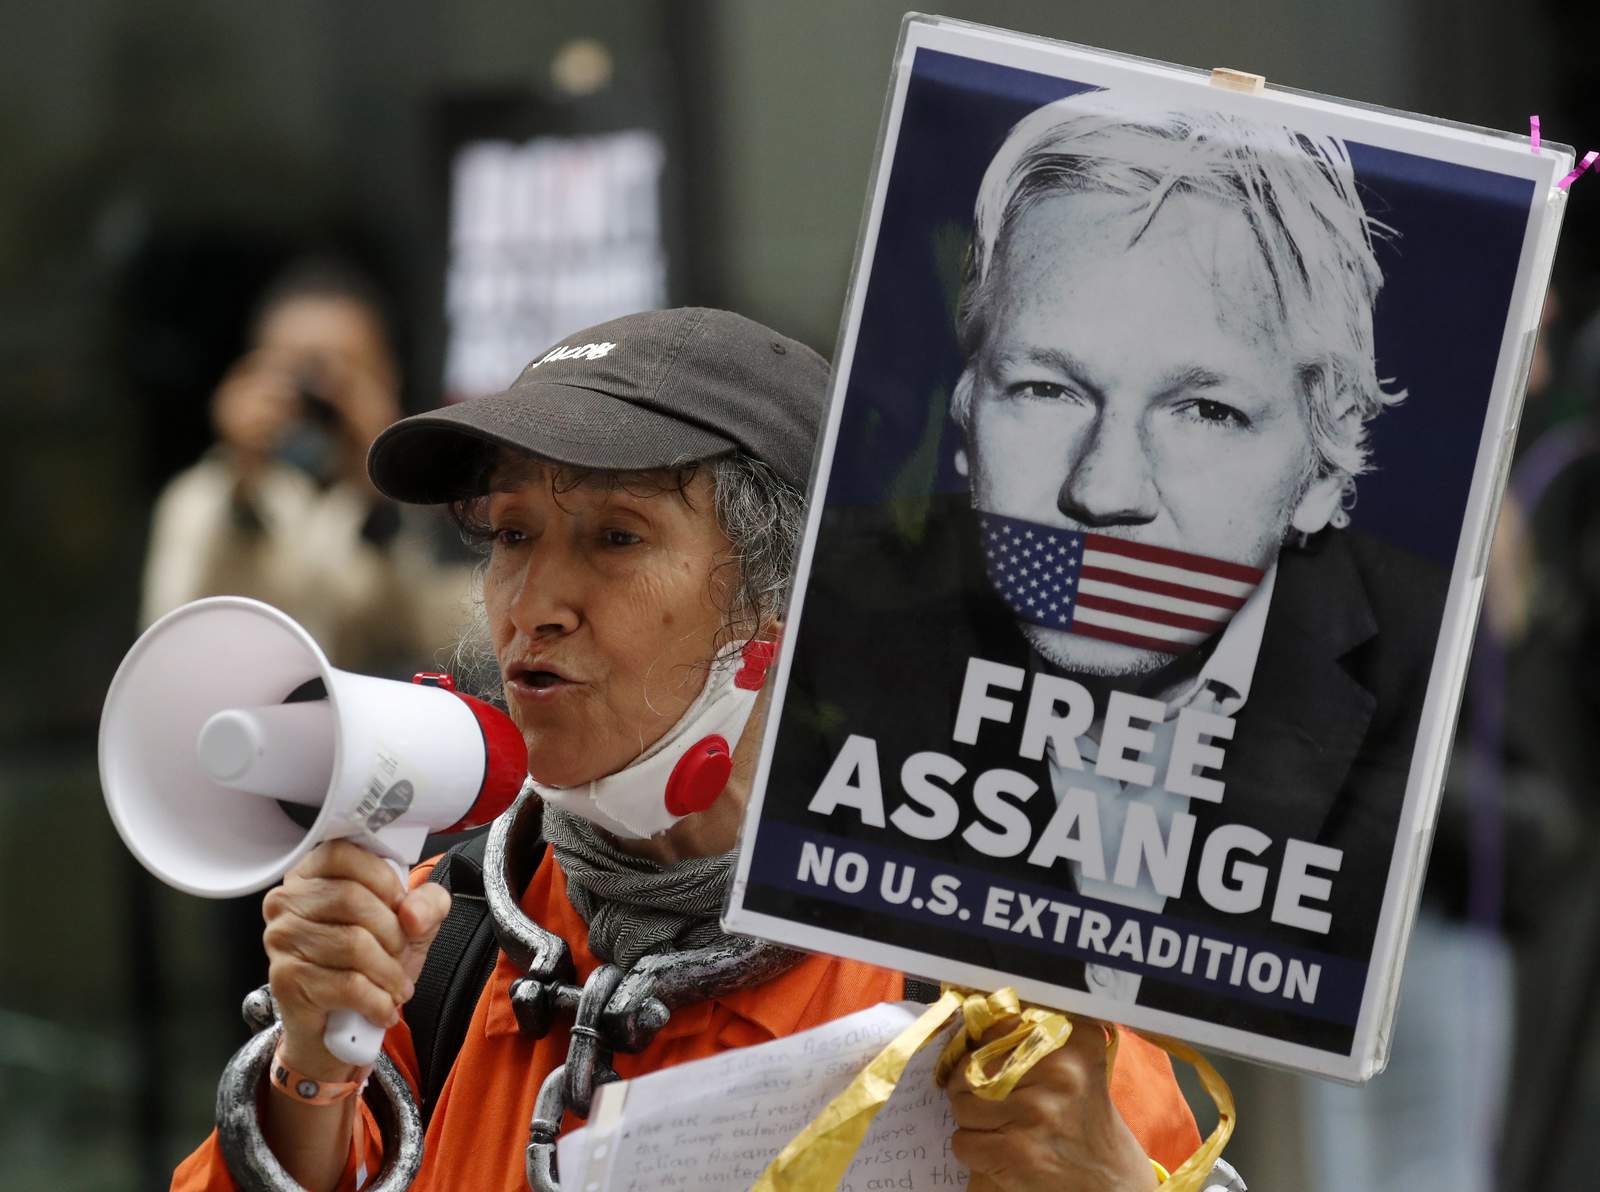 Assange extradition hearing paused over COVID-19 risk